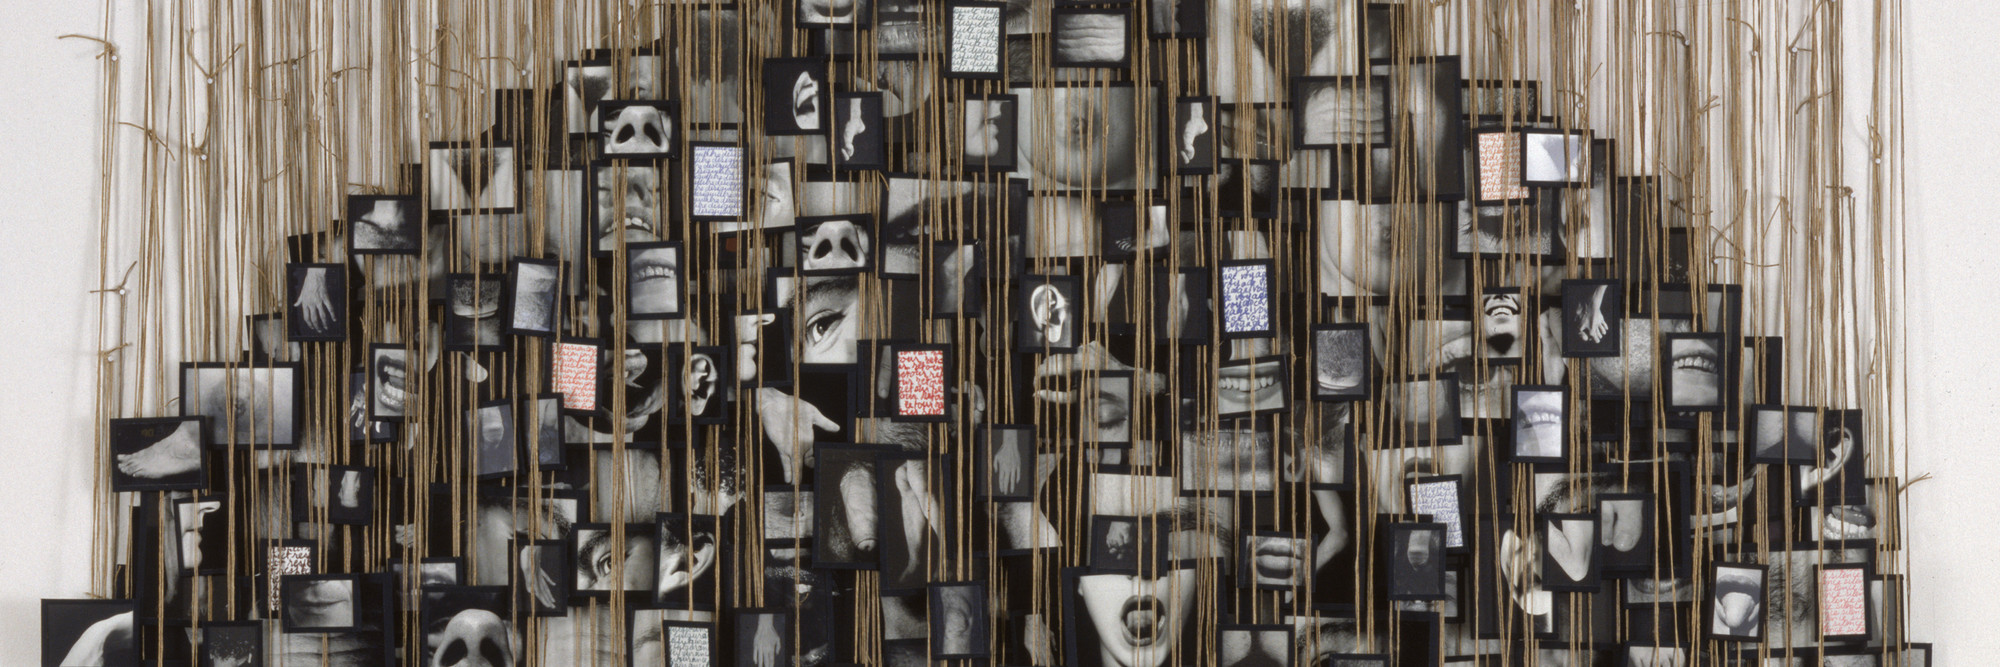 Annette Messager. My Vows. 1988–91. Gelatin silver prints, colored pencil on paper, glass, tape, string, and pushpins. Overall approximately 11′ 8 1/4″ × 6′ 6 3/4″ (356.2 × 200 cm). Gift of the Peter Norton Family Foundation. © 2016 Artists Rights Society (ARS), New York / ADAGP, Paris